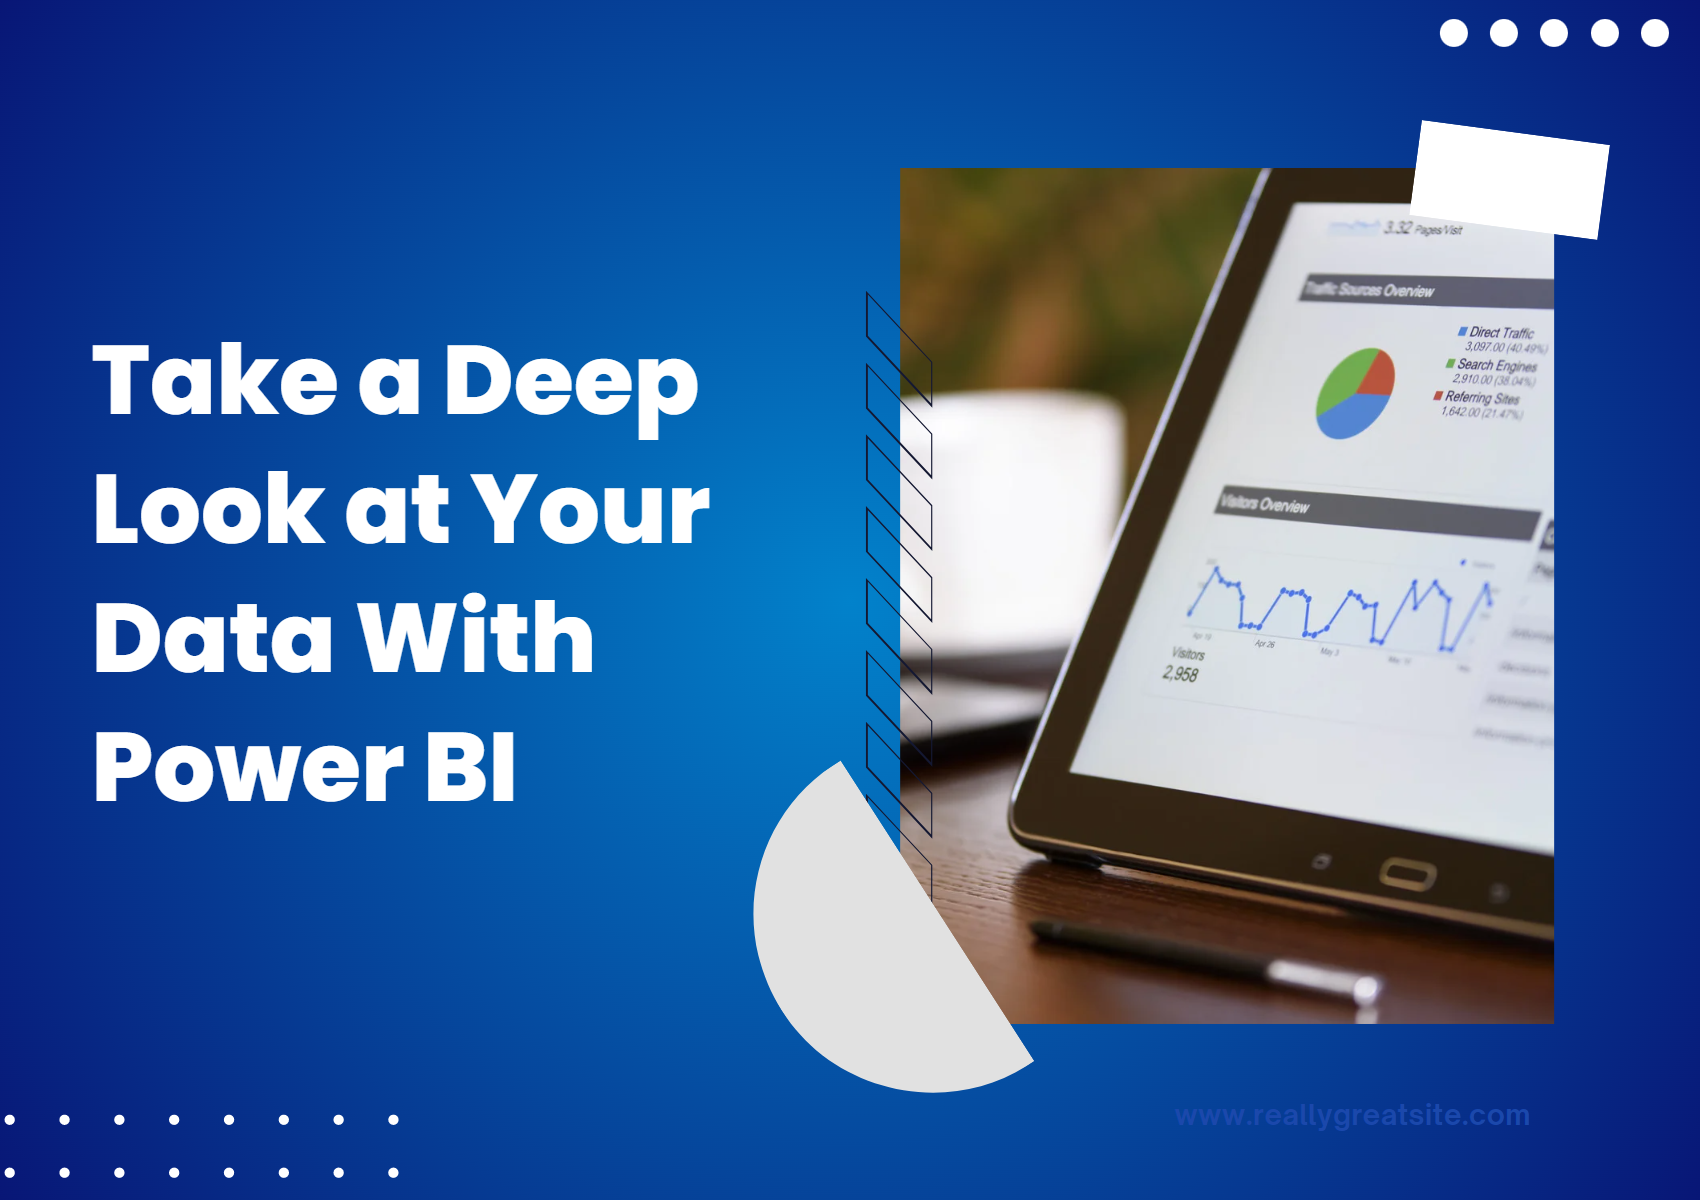 Take a Deep Look at Your Data With Power BI